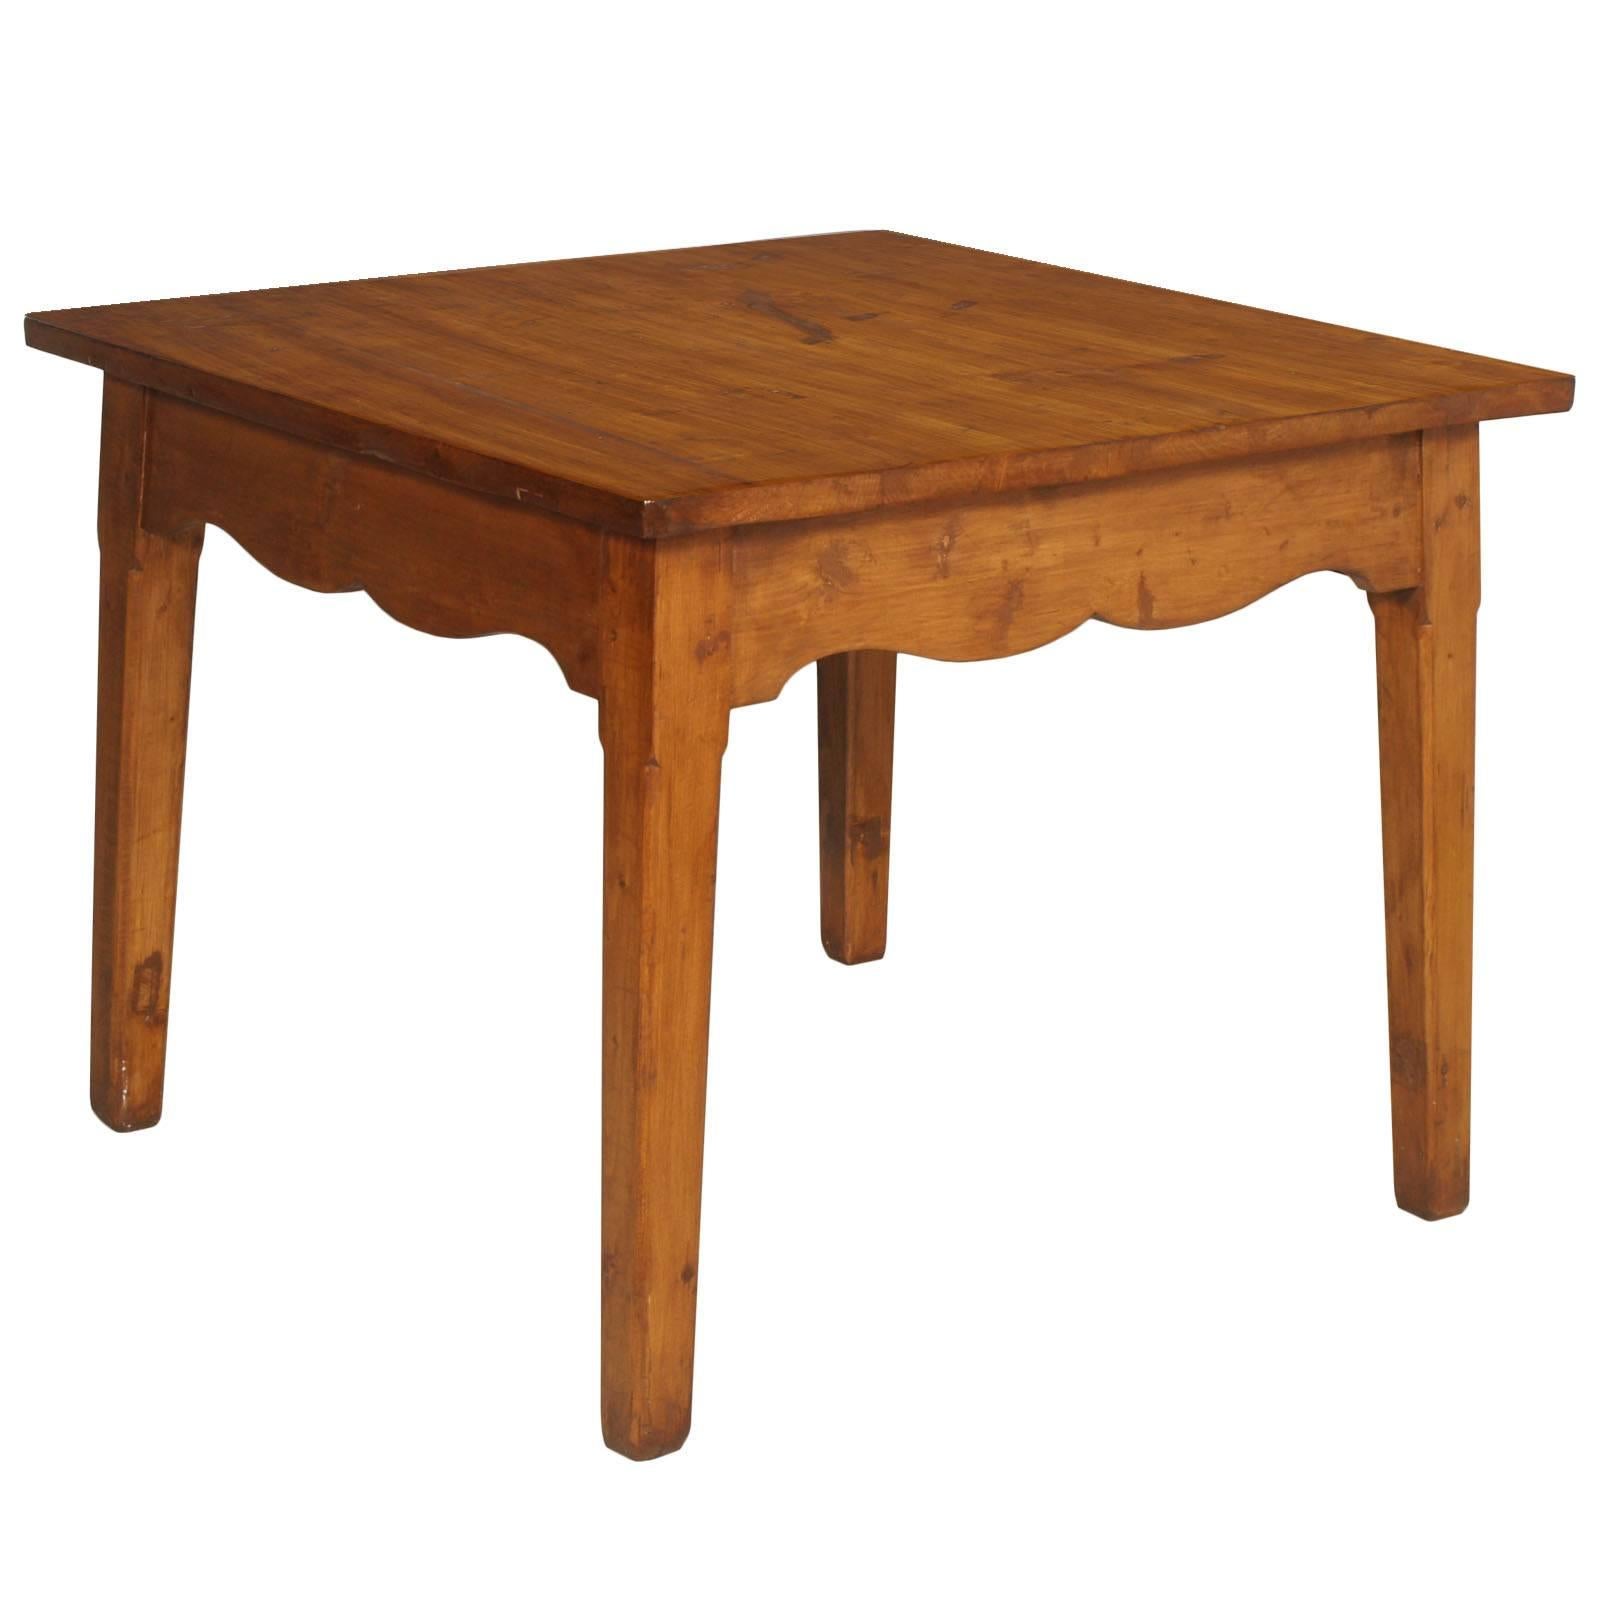 Tyrolean Square Table in Solid Larch Rustic Mountain Style Art Deco, 1920s For Sale